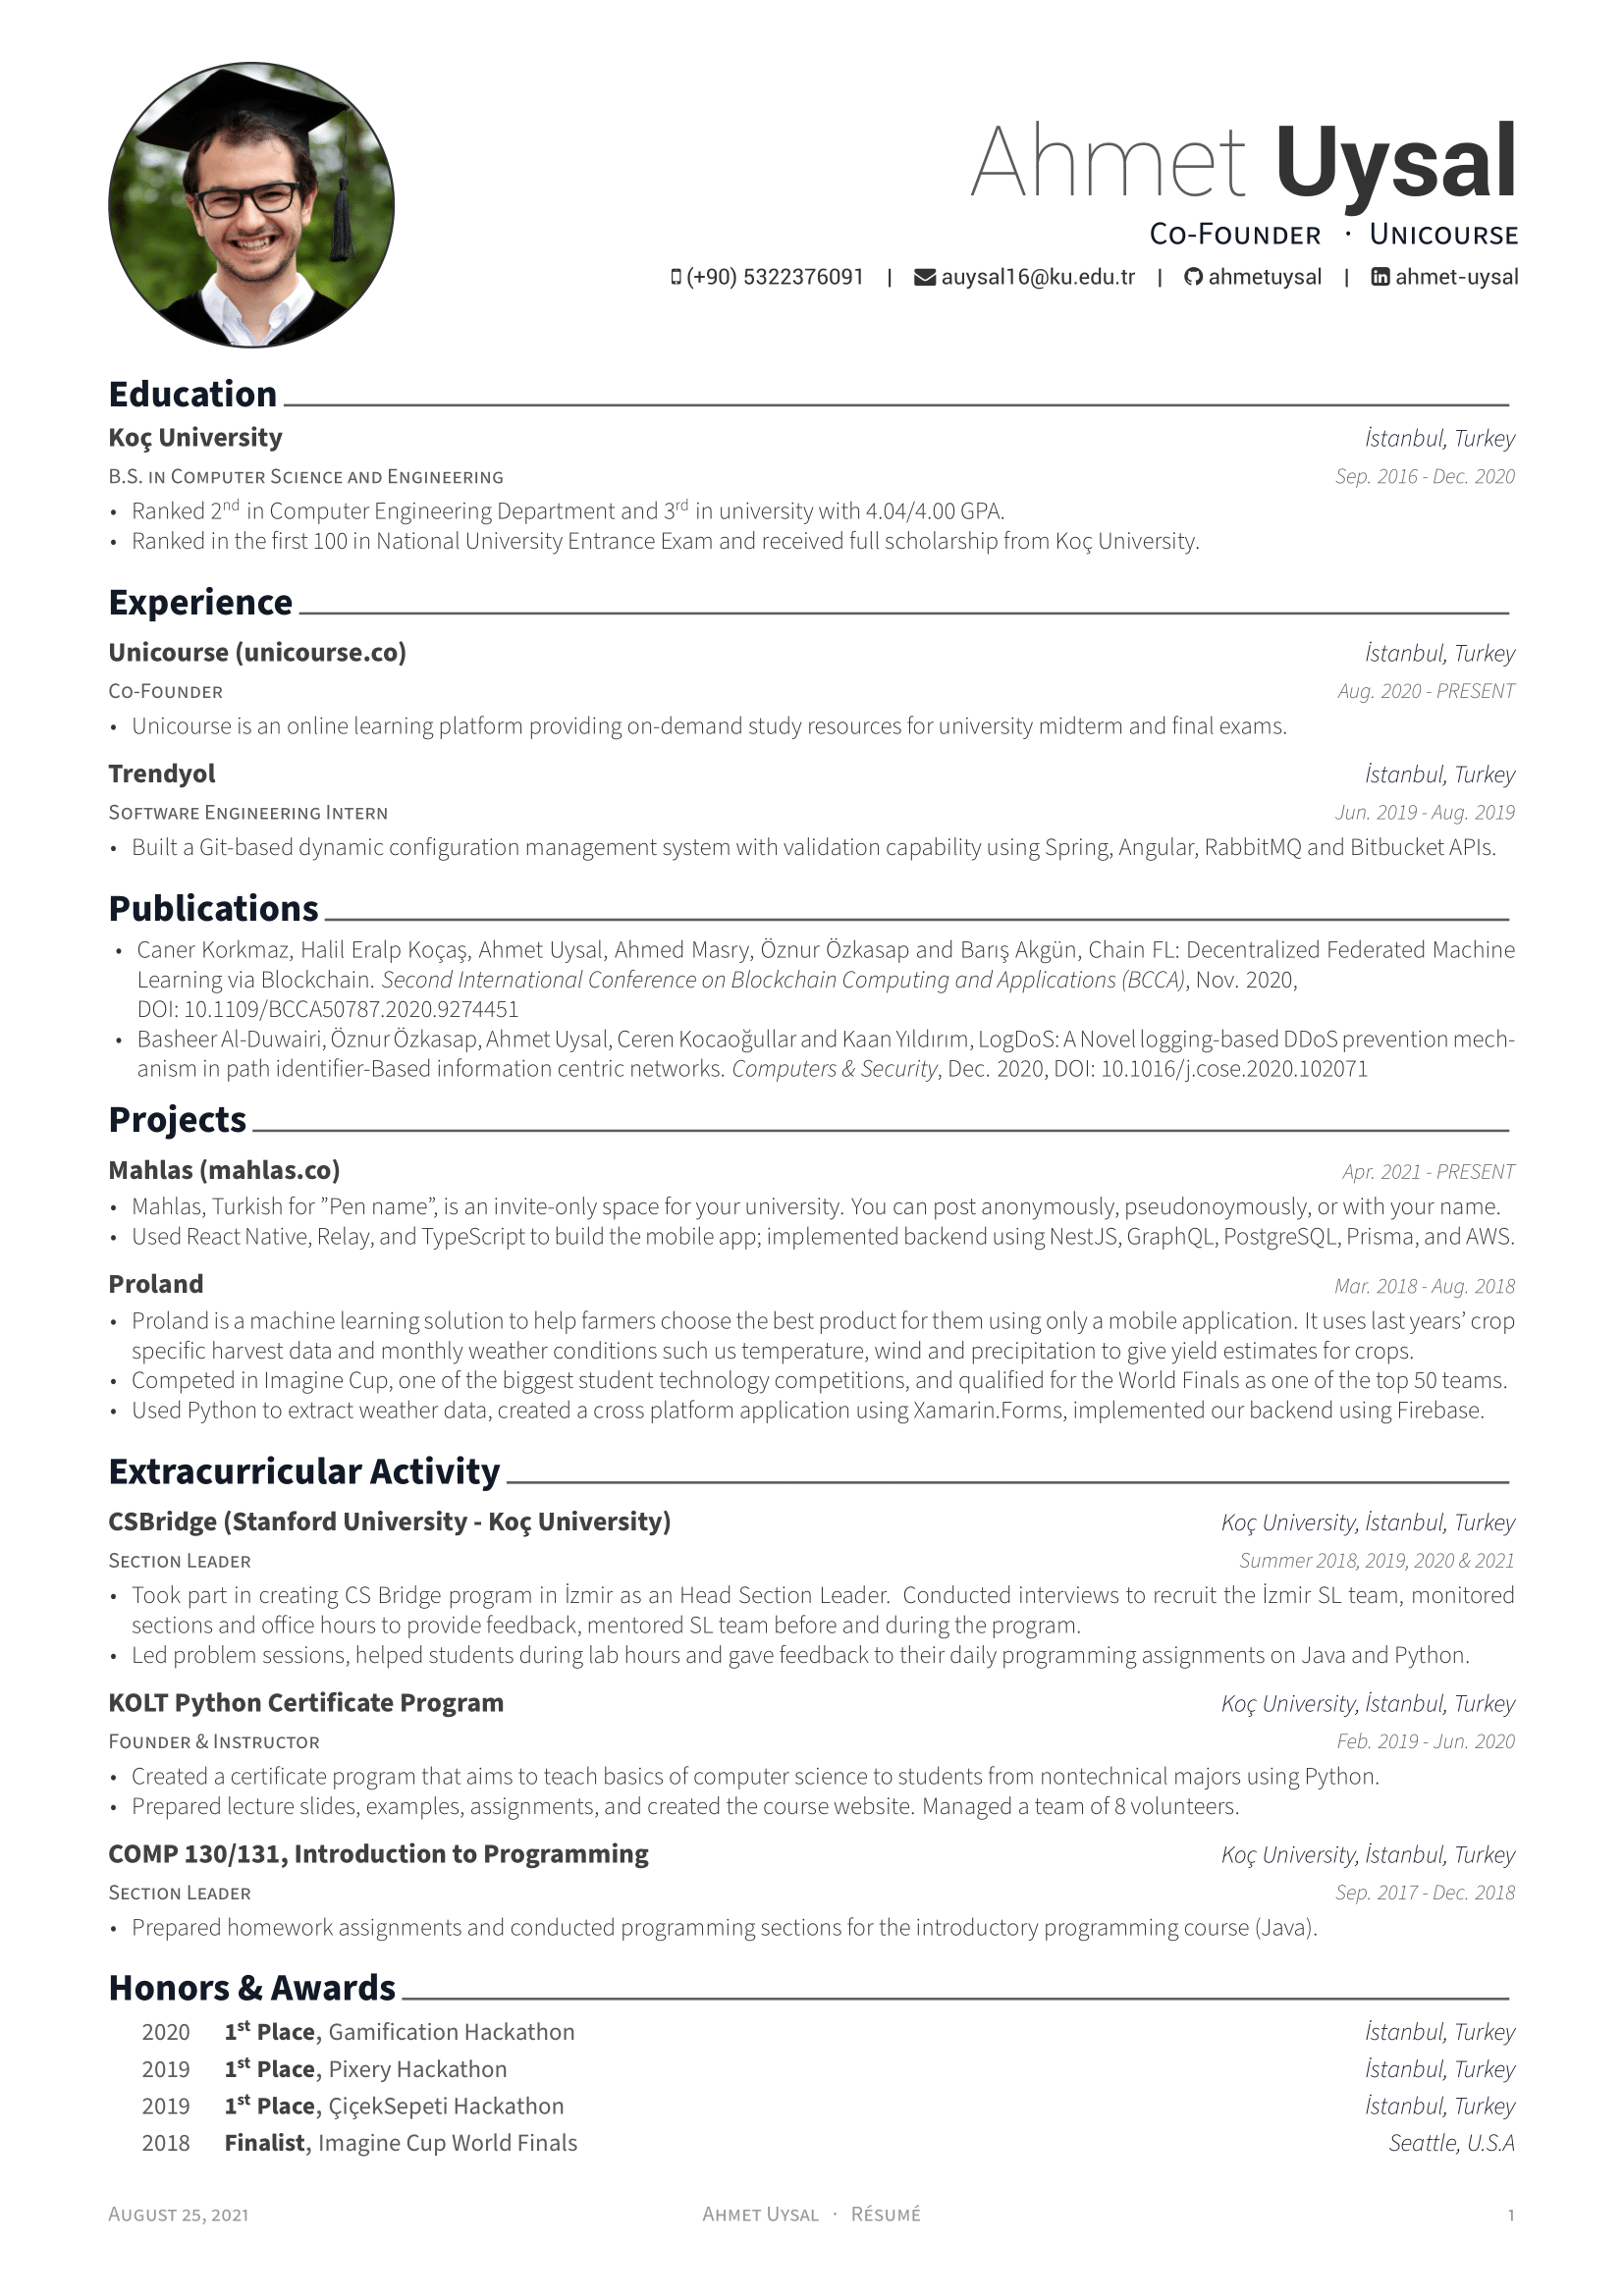 My Resume in Image Format